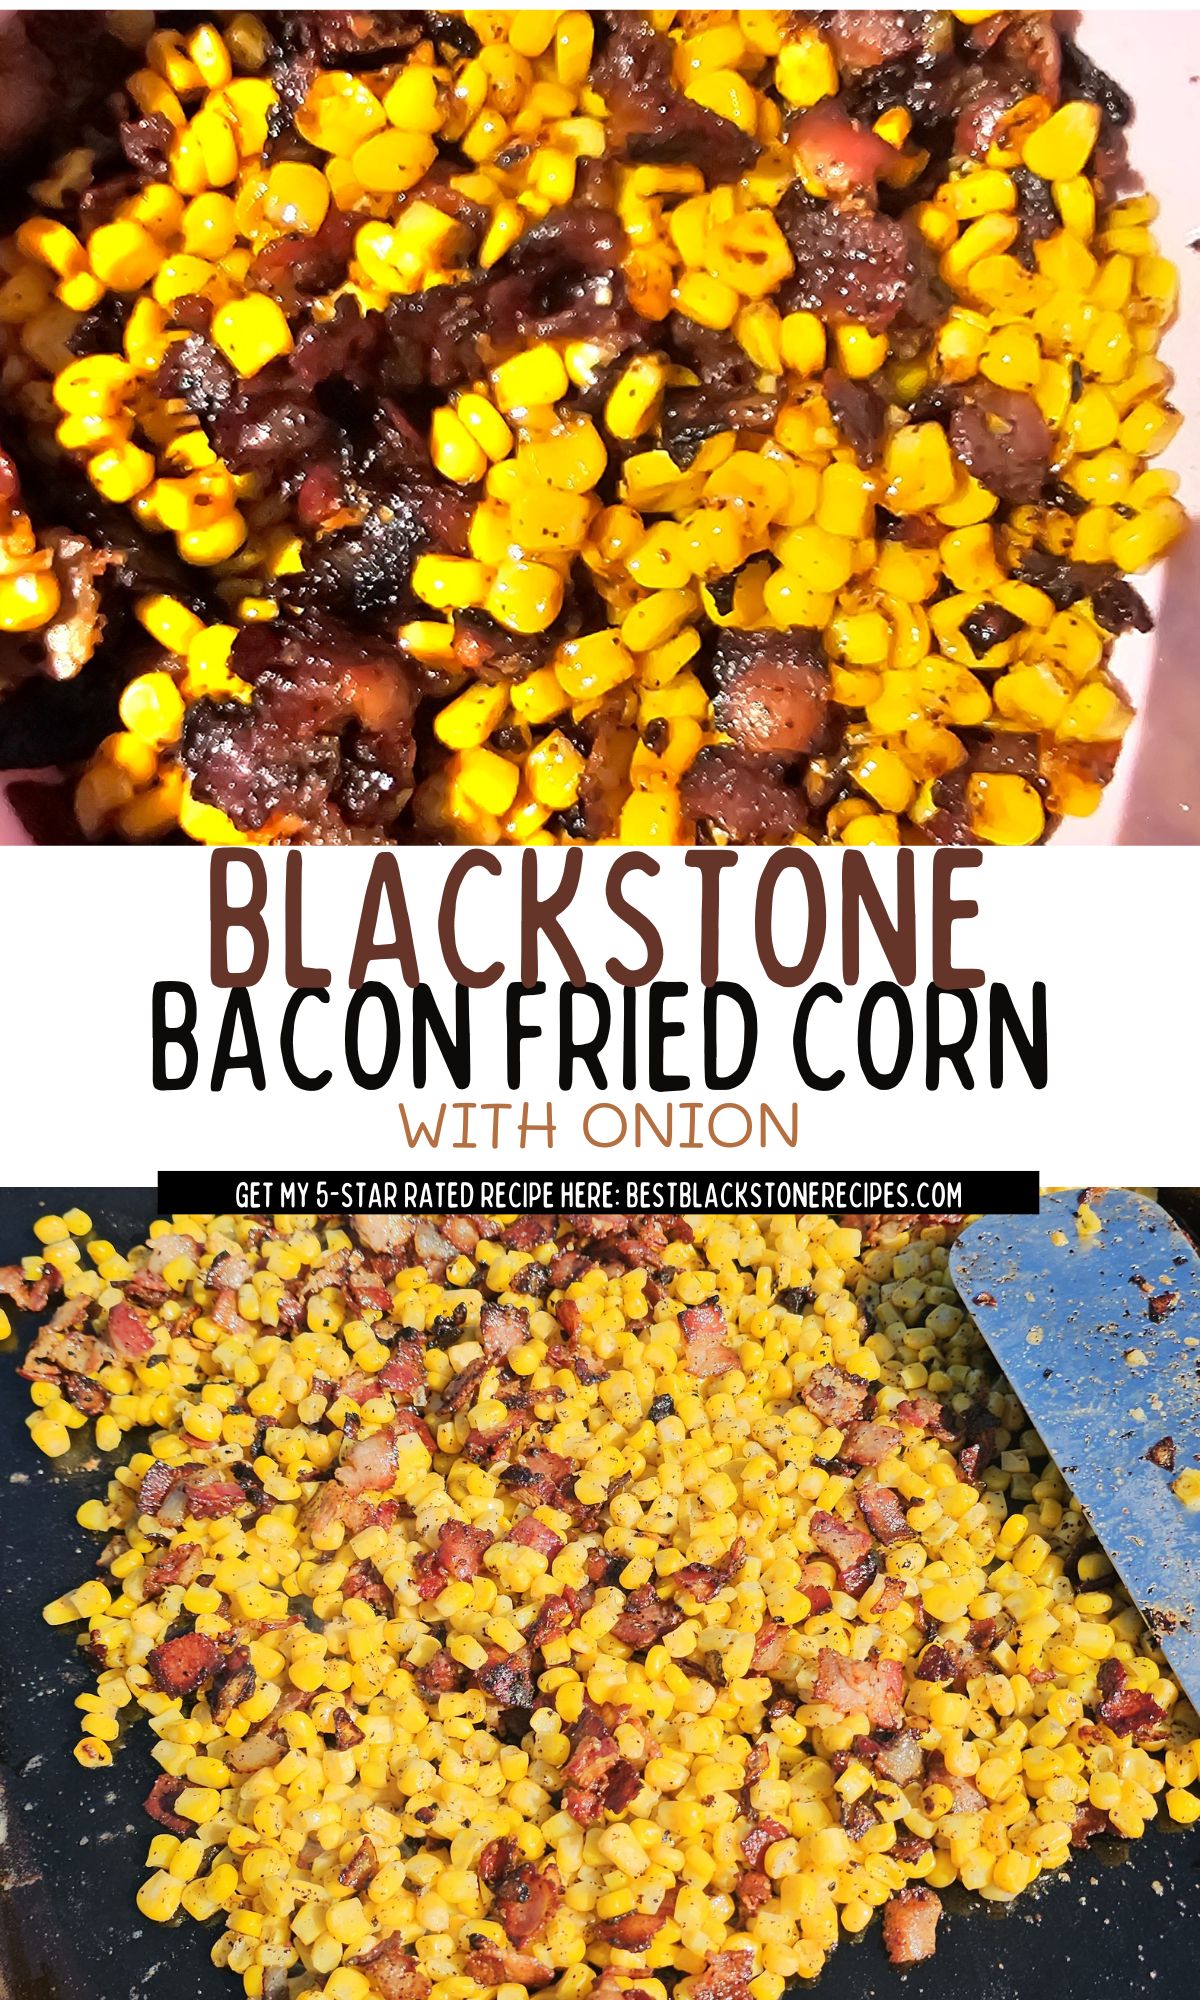 Corn with bacon and onion cooked on a griddle, recipe promotion.